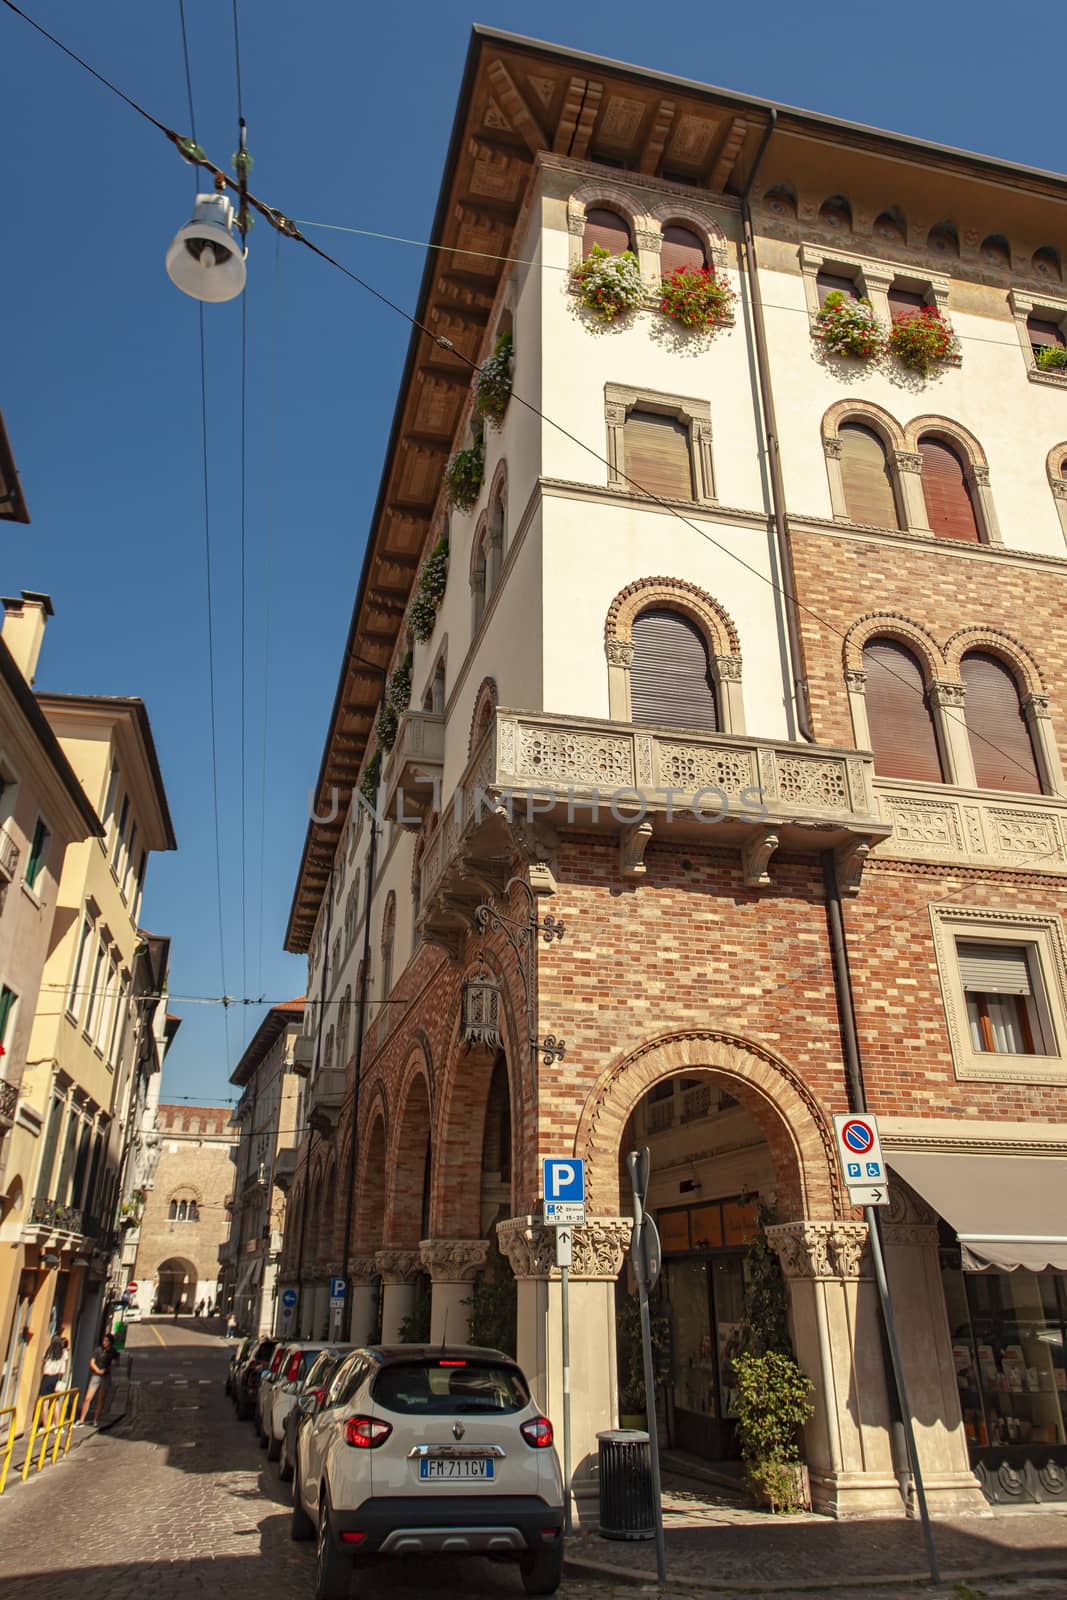 Historical buildings with arcades in Treviso 2 by pippocarlot